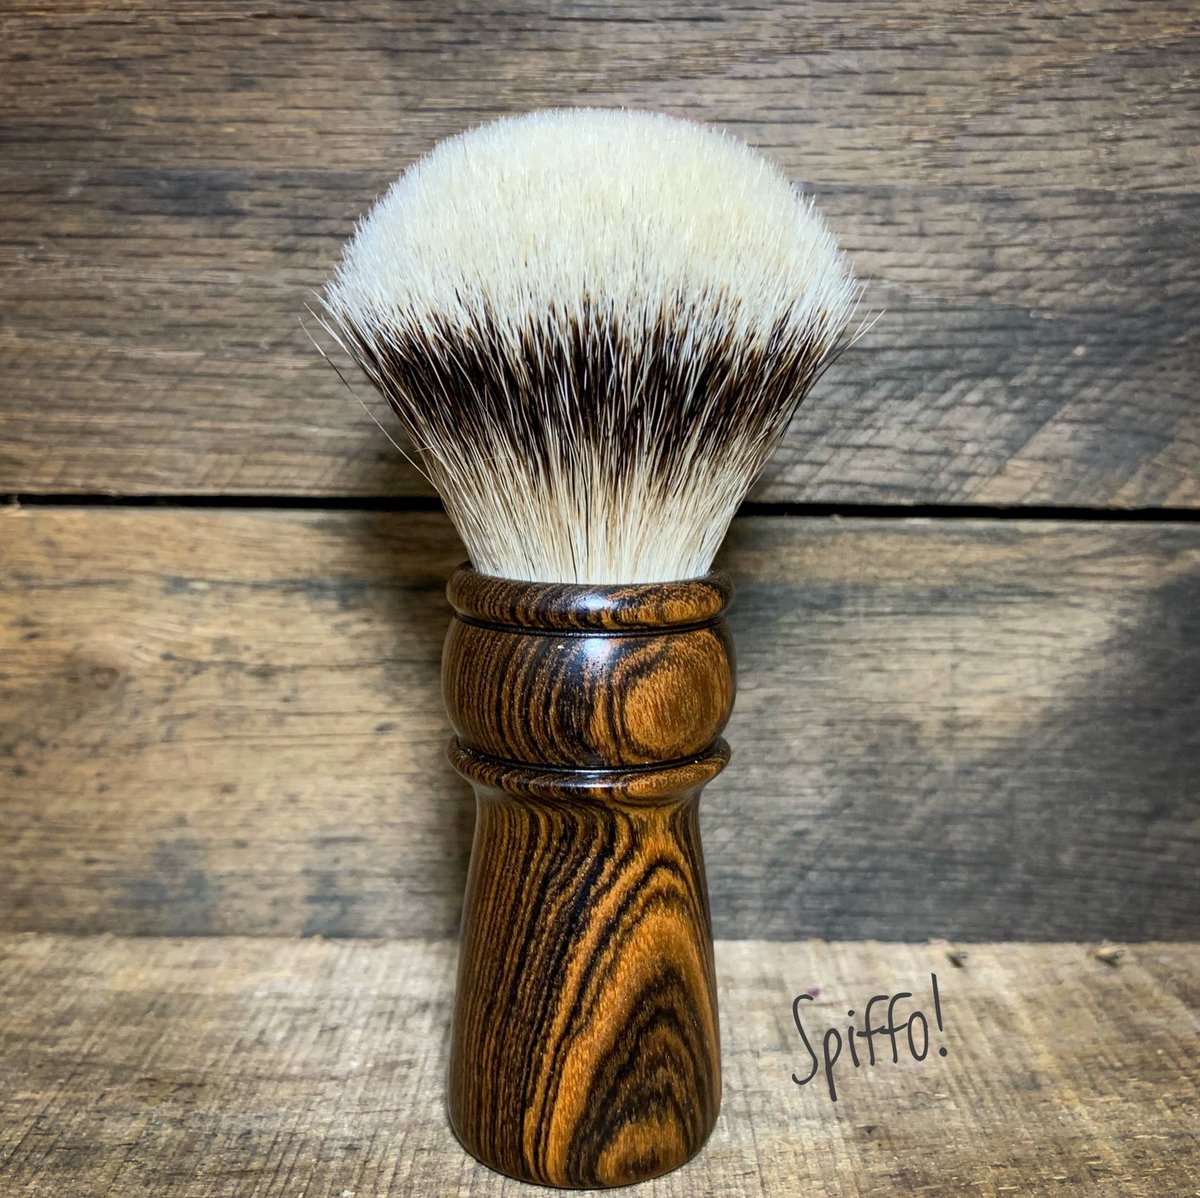 The beautiful handle of Bograne is made of Bocote, an exotic wood from Mexico and South America. It is topped with a complementing High Mountain White knot 😎 #shavingbrush #shavebrush #shavingbrushes #spiffo #spiffoman #shaveoftheday #shaving #wetshaving #madeinhalifax #halifax